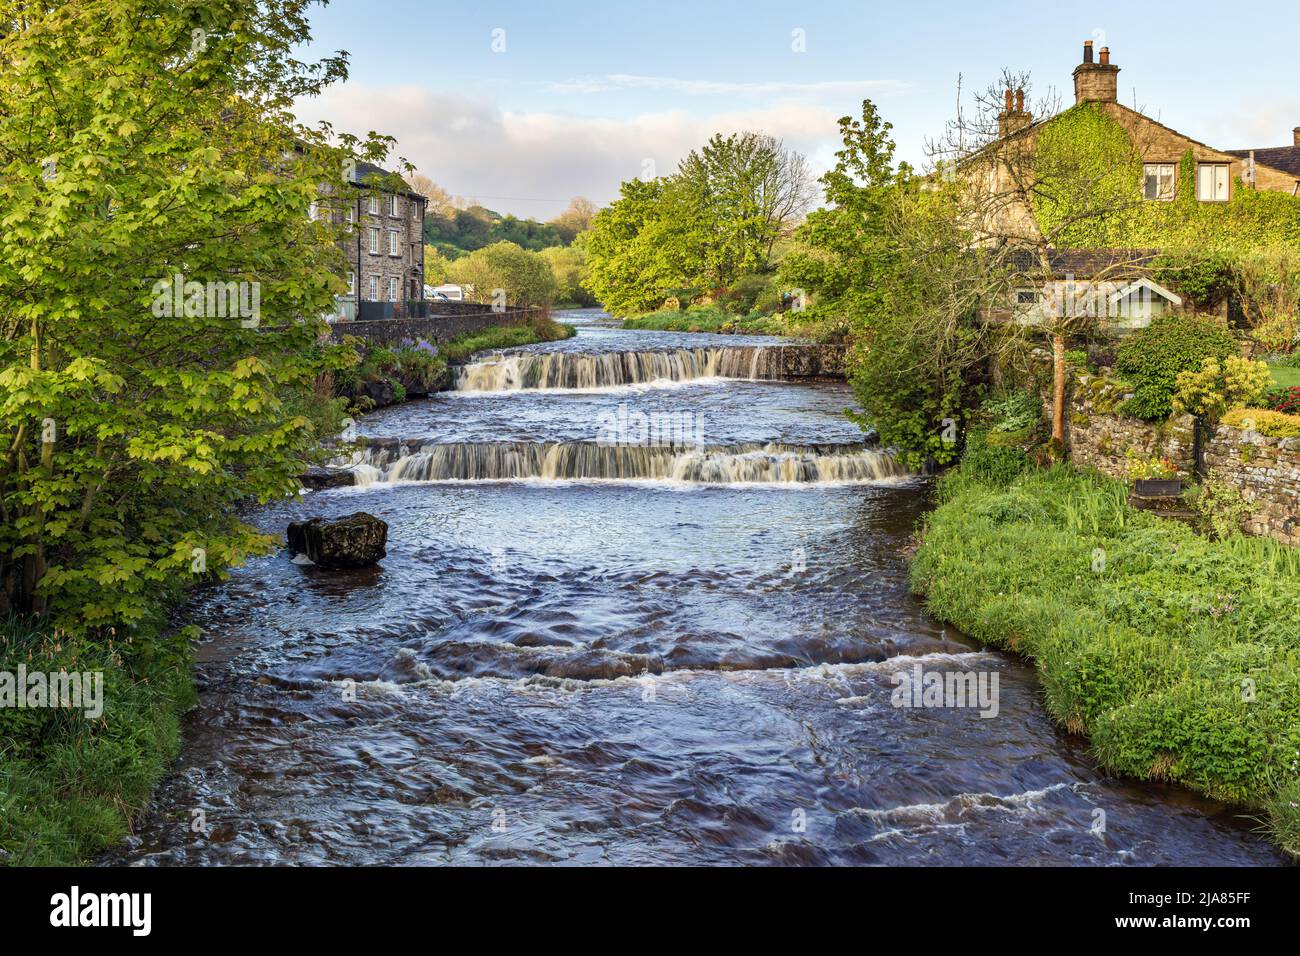 The falls on Gayle Beck in the picturesque hamlet of Gayle near the town of Hawes, Wenslydale, Yorkshire Dales National Park, England, Uk Stock Photo